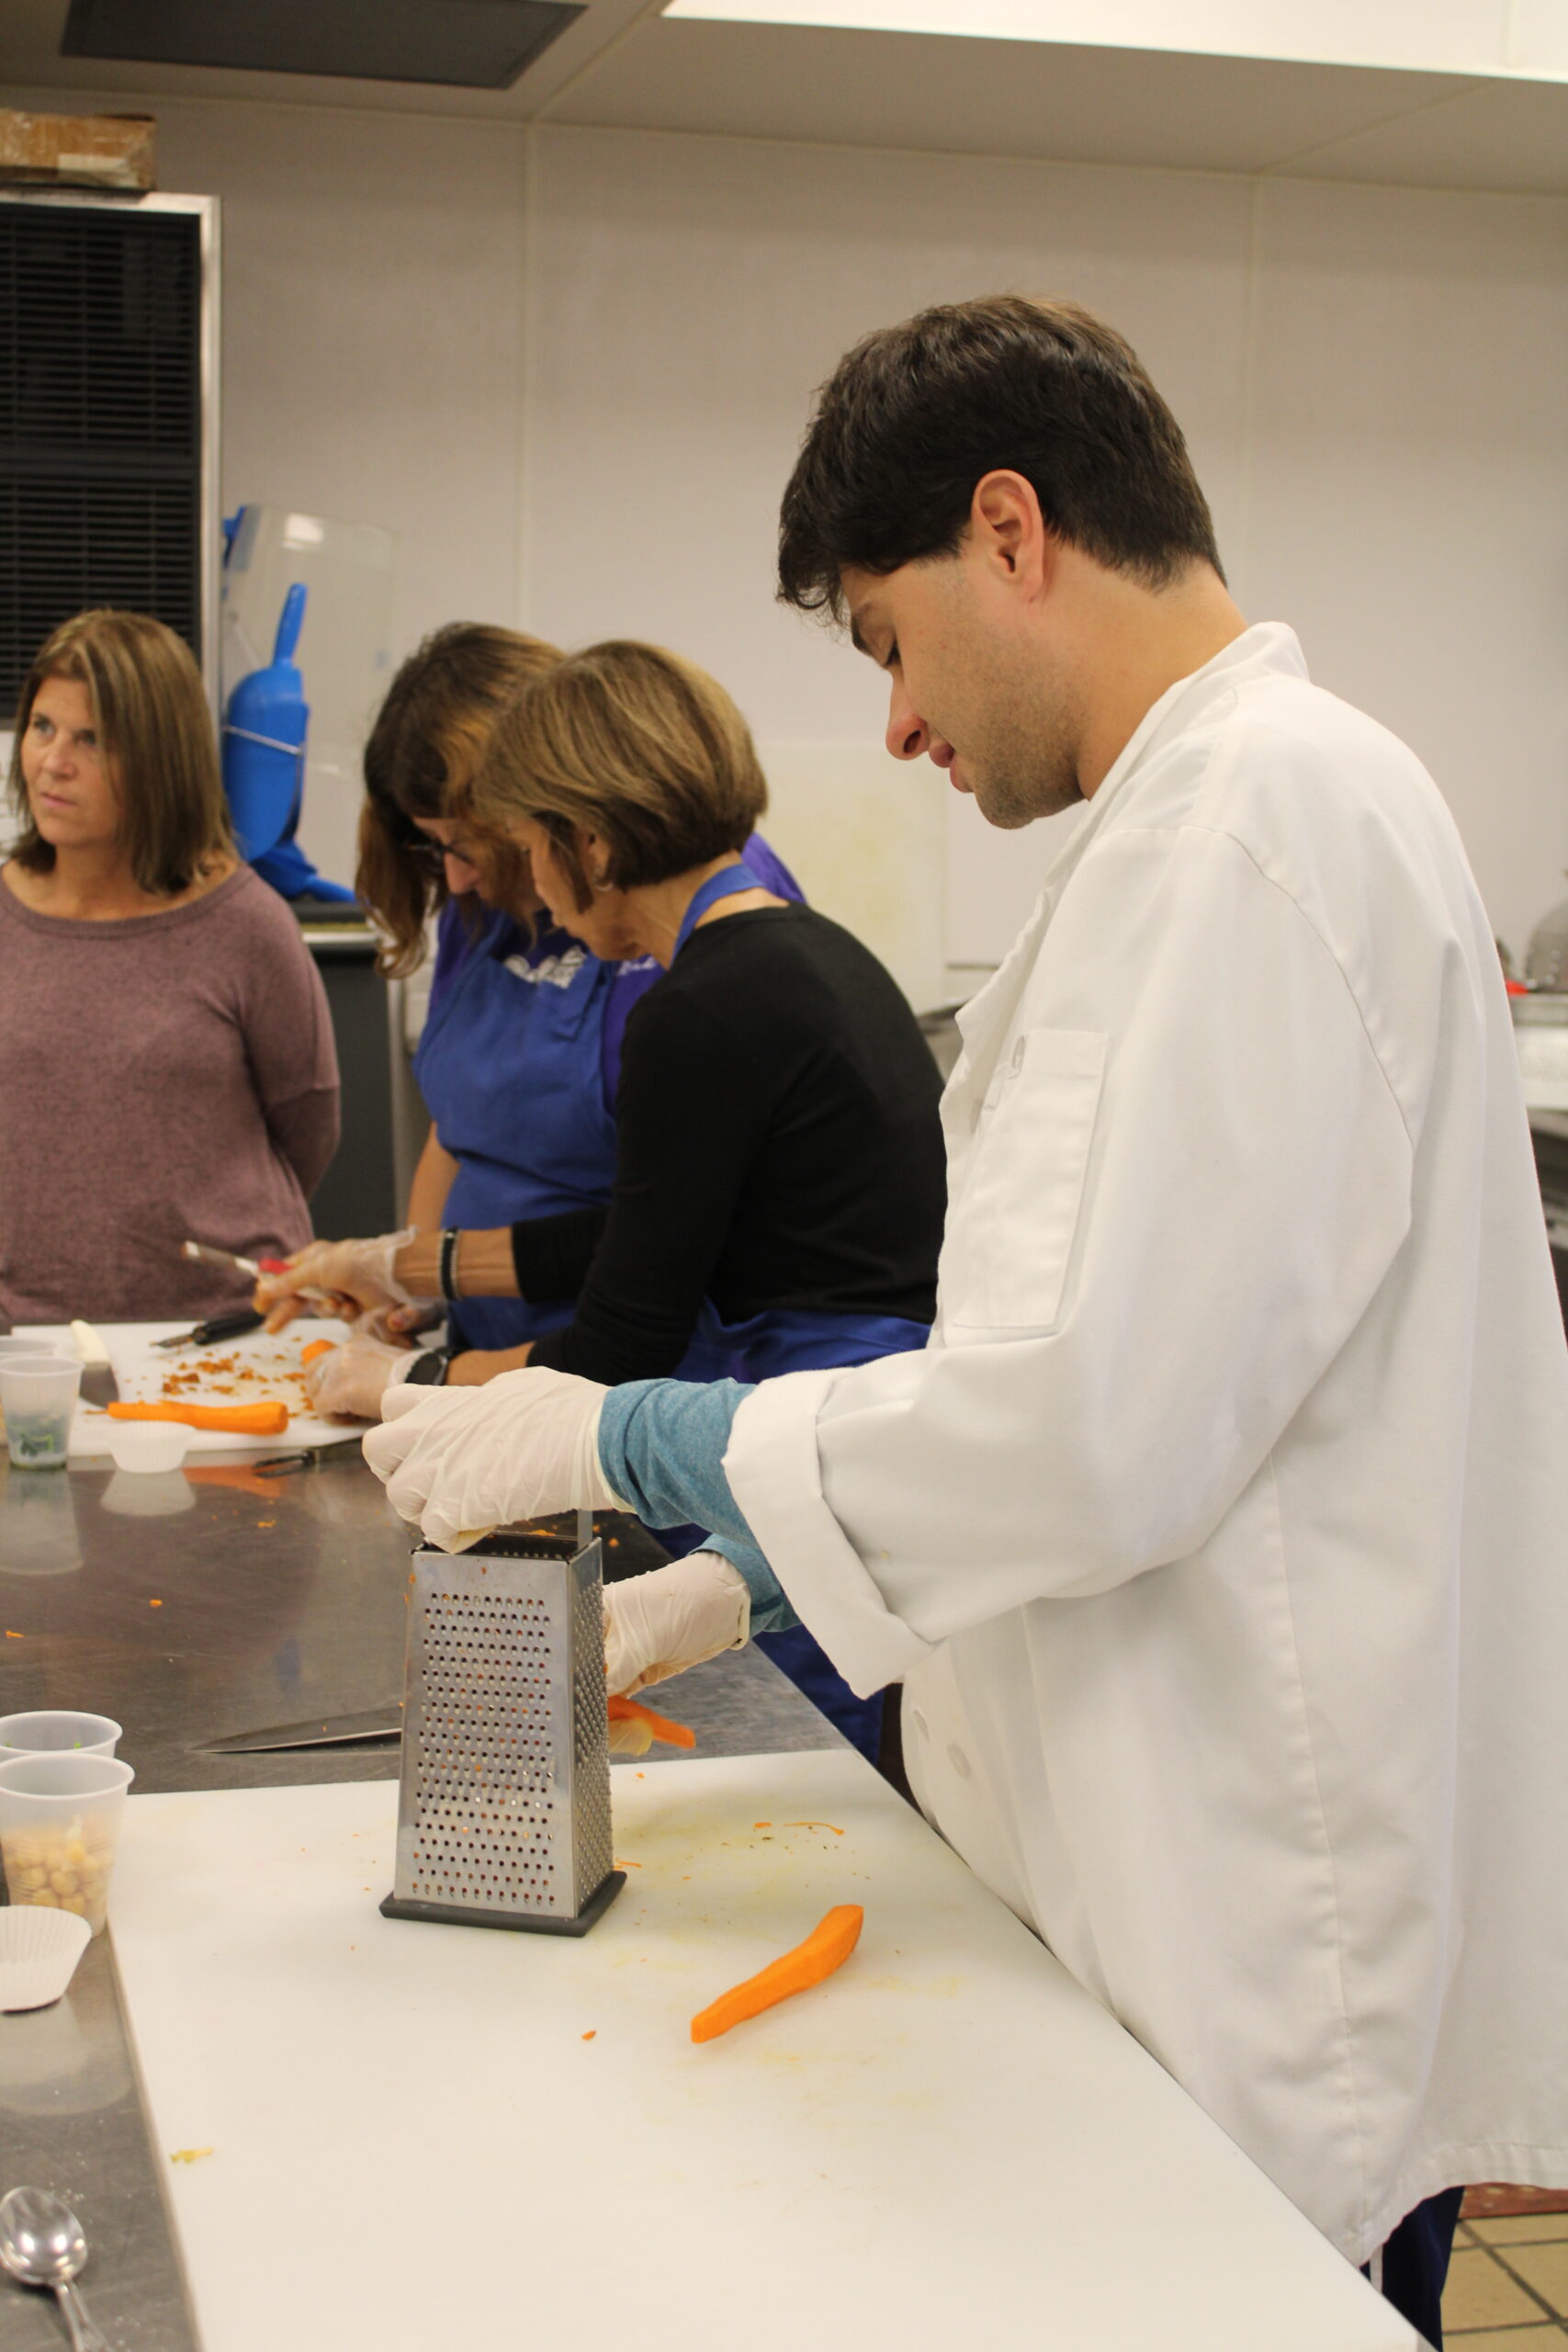 Christian Ciardiello grates carrots for a stuffed sweet potato recipe. Every Wednesday, the group meets to learn about kitchen safety, food handling and how to cook.   ELIZABETH VESPE